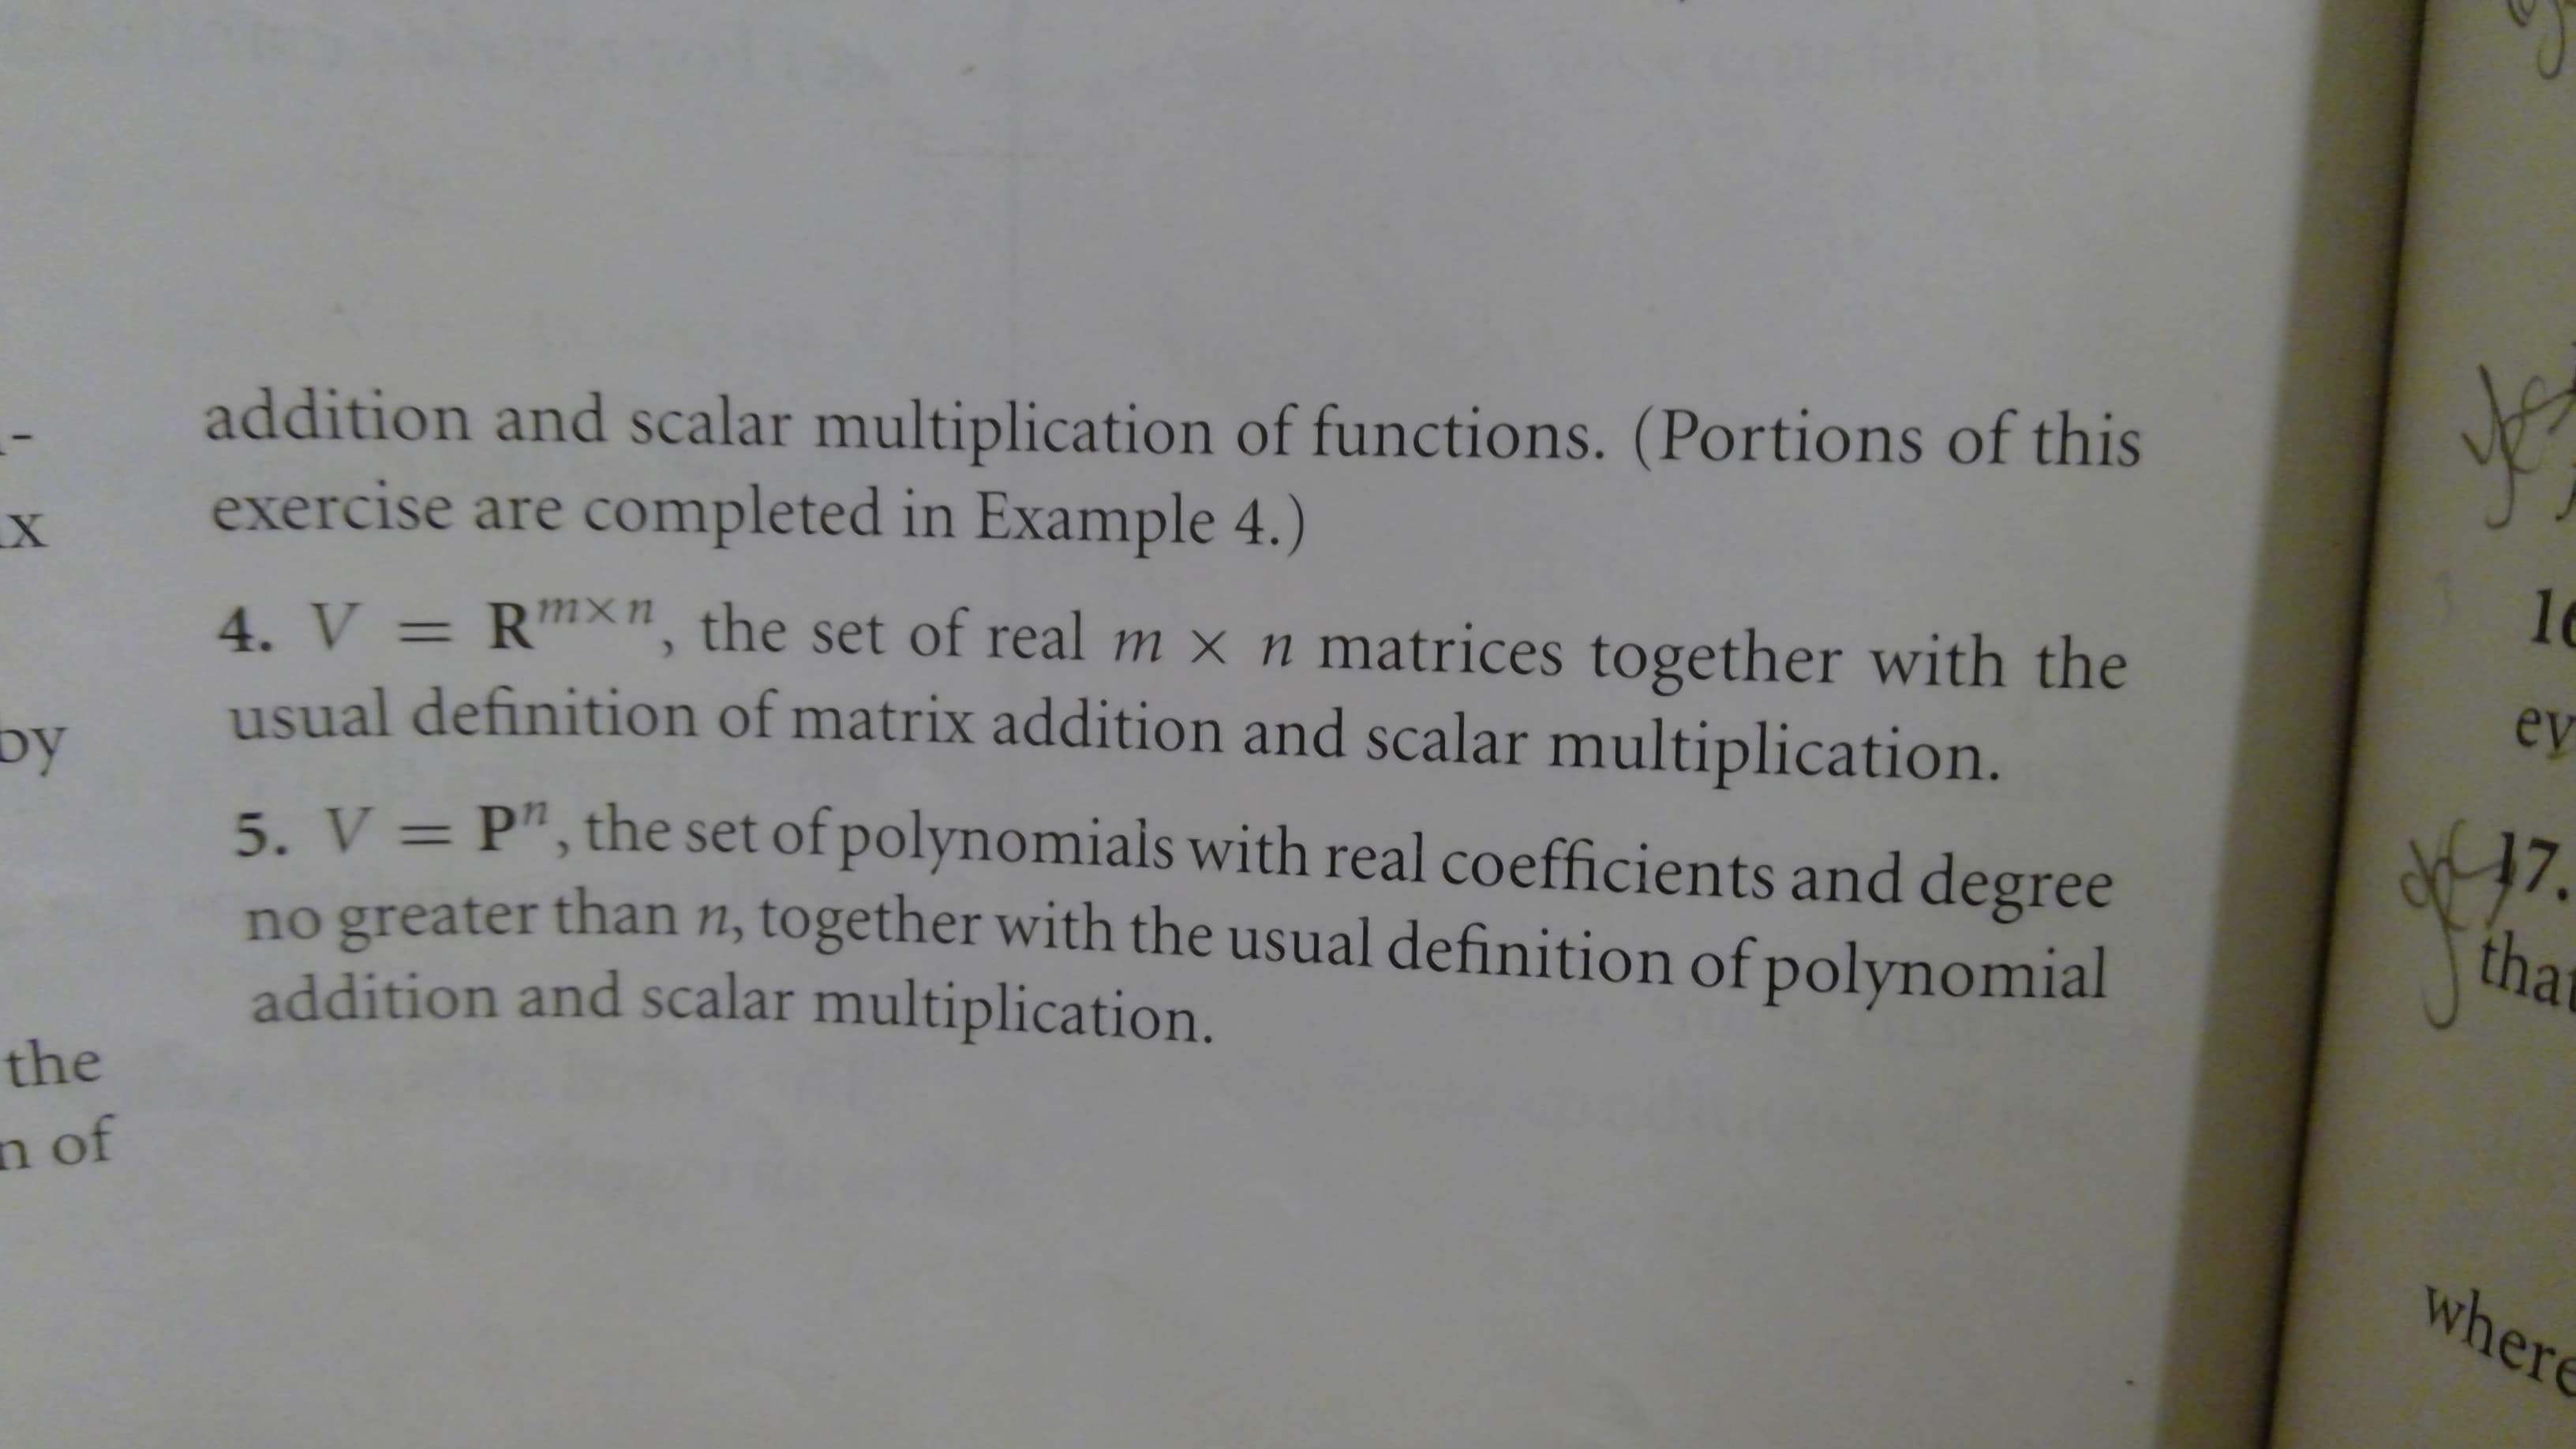 addition and scalar multiplication of functions. (Portions of this
exercise are completed in Example 4.)
4. V = R"n, the set of real m x n matrices together with the
usual definition of matrix addition and scalar multiplication.
ey
97.
tha
by
5. V = P", the set of polynomials with real coefficients and degree
no greater than n, together with the usual definition of polynomial
addition and scalar multiplication.
1
the
n of
where
